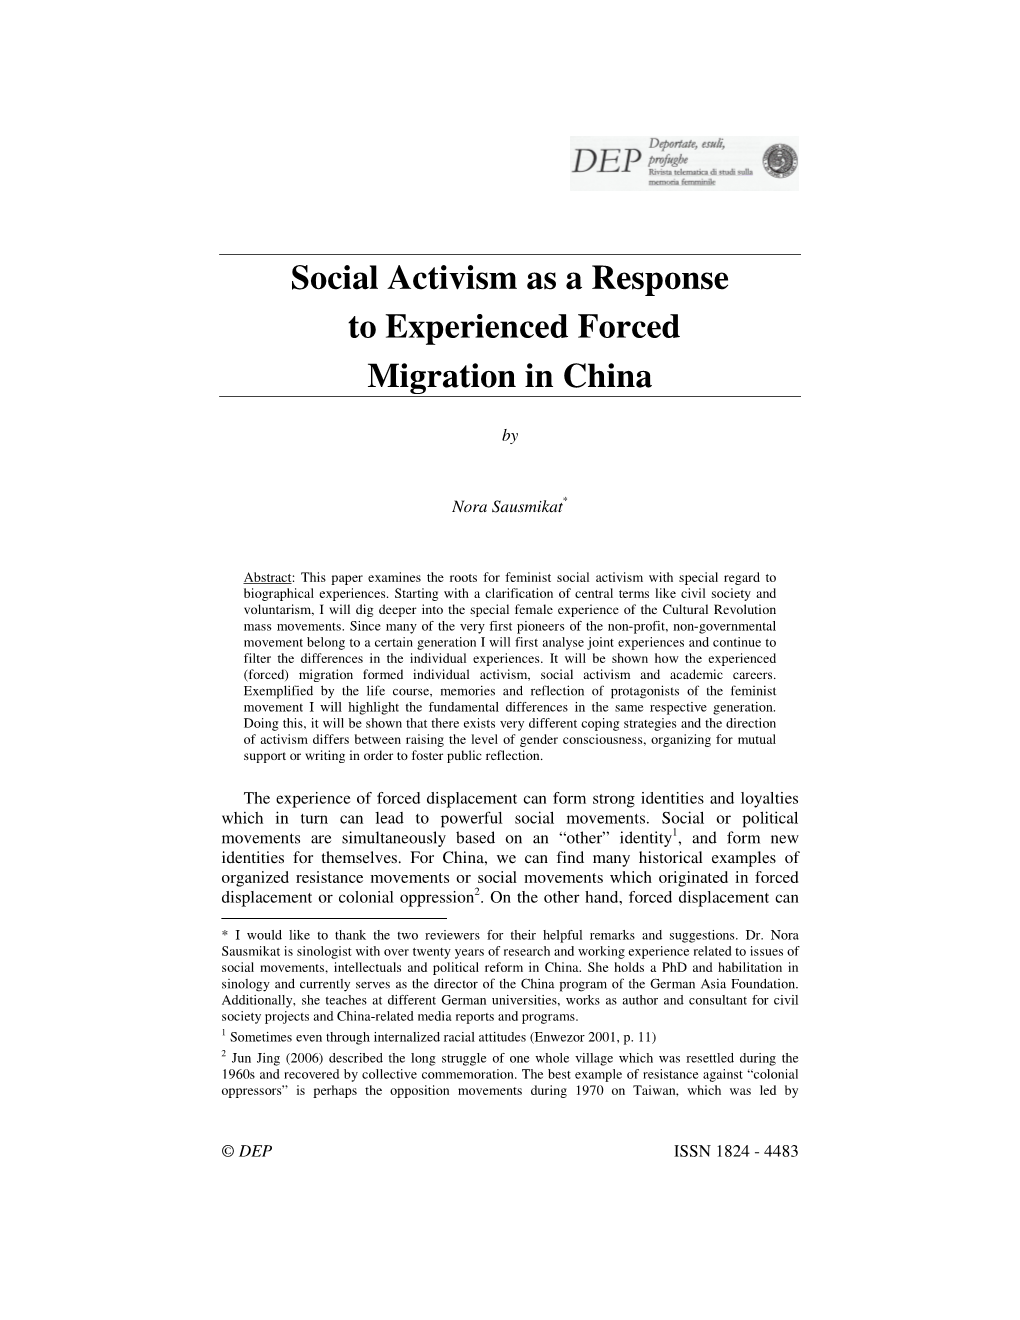 Social Activism As a Response to Experienced Forced Migration in China